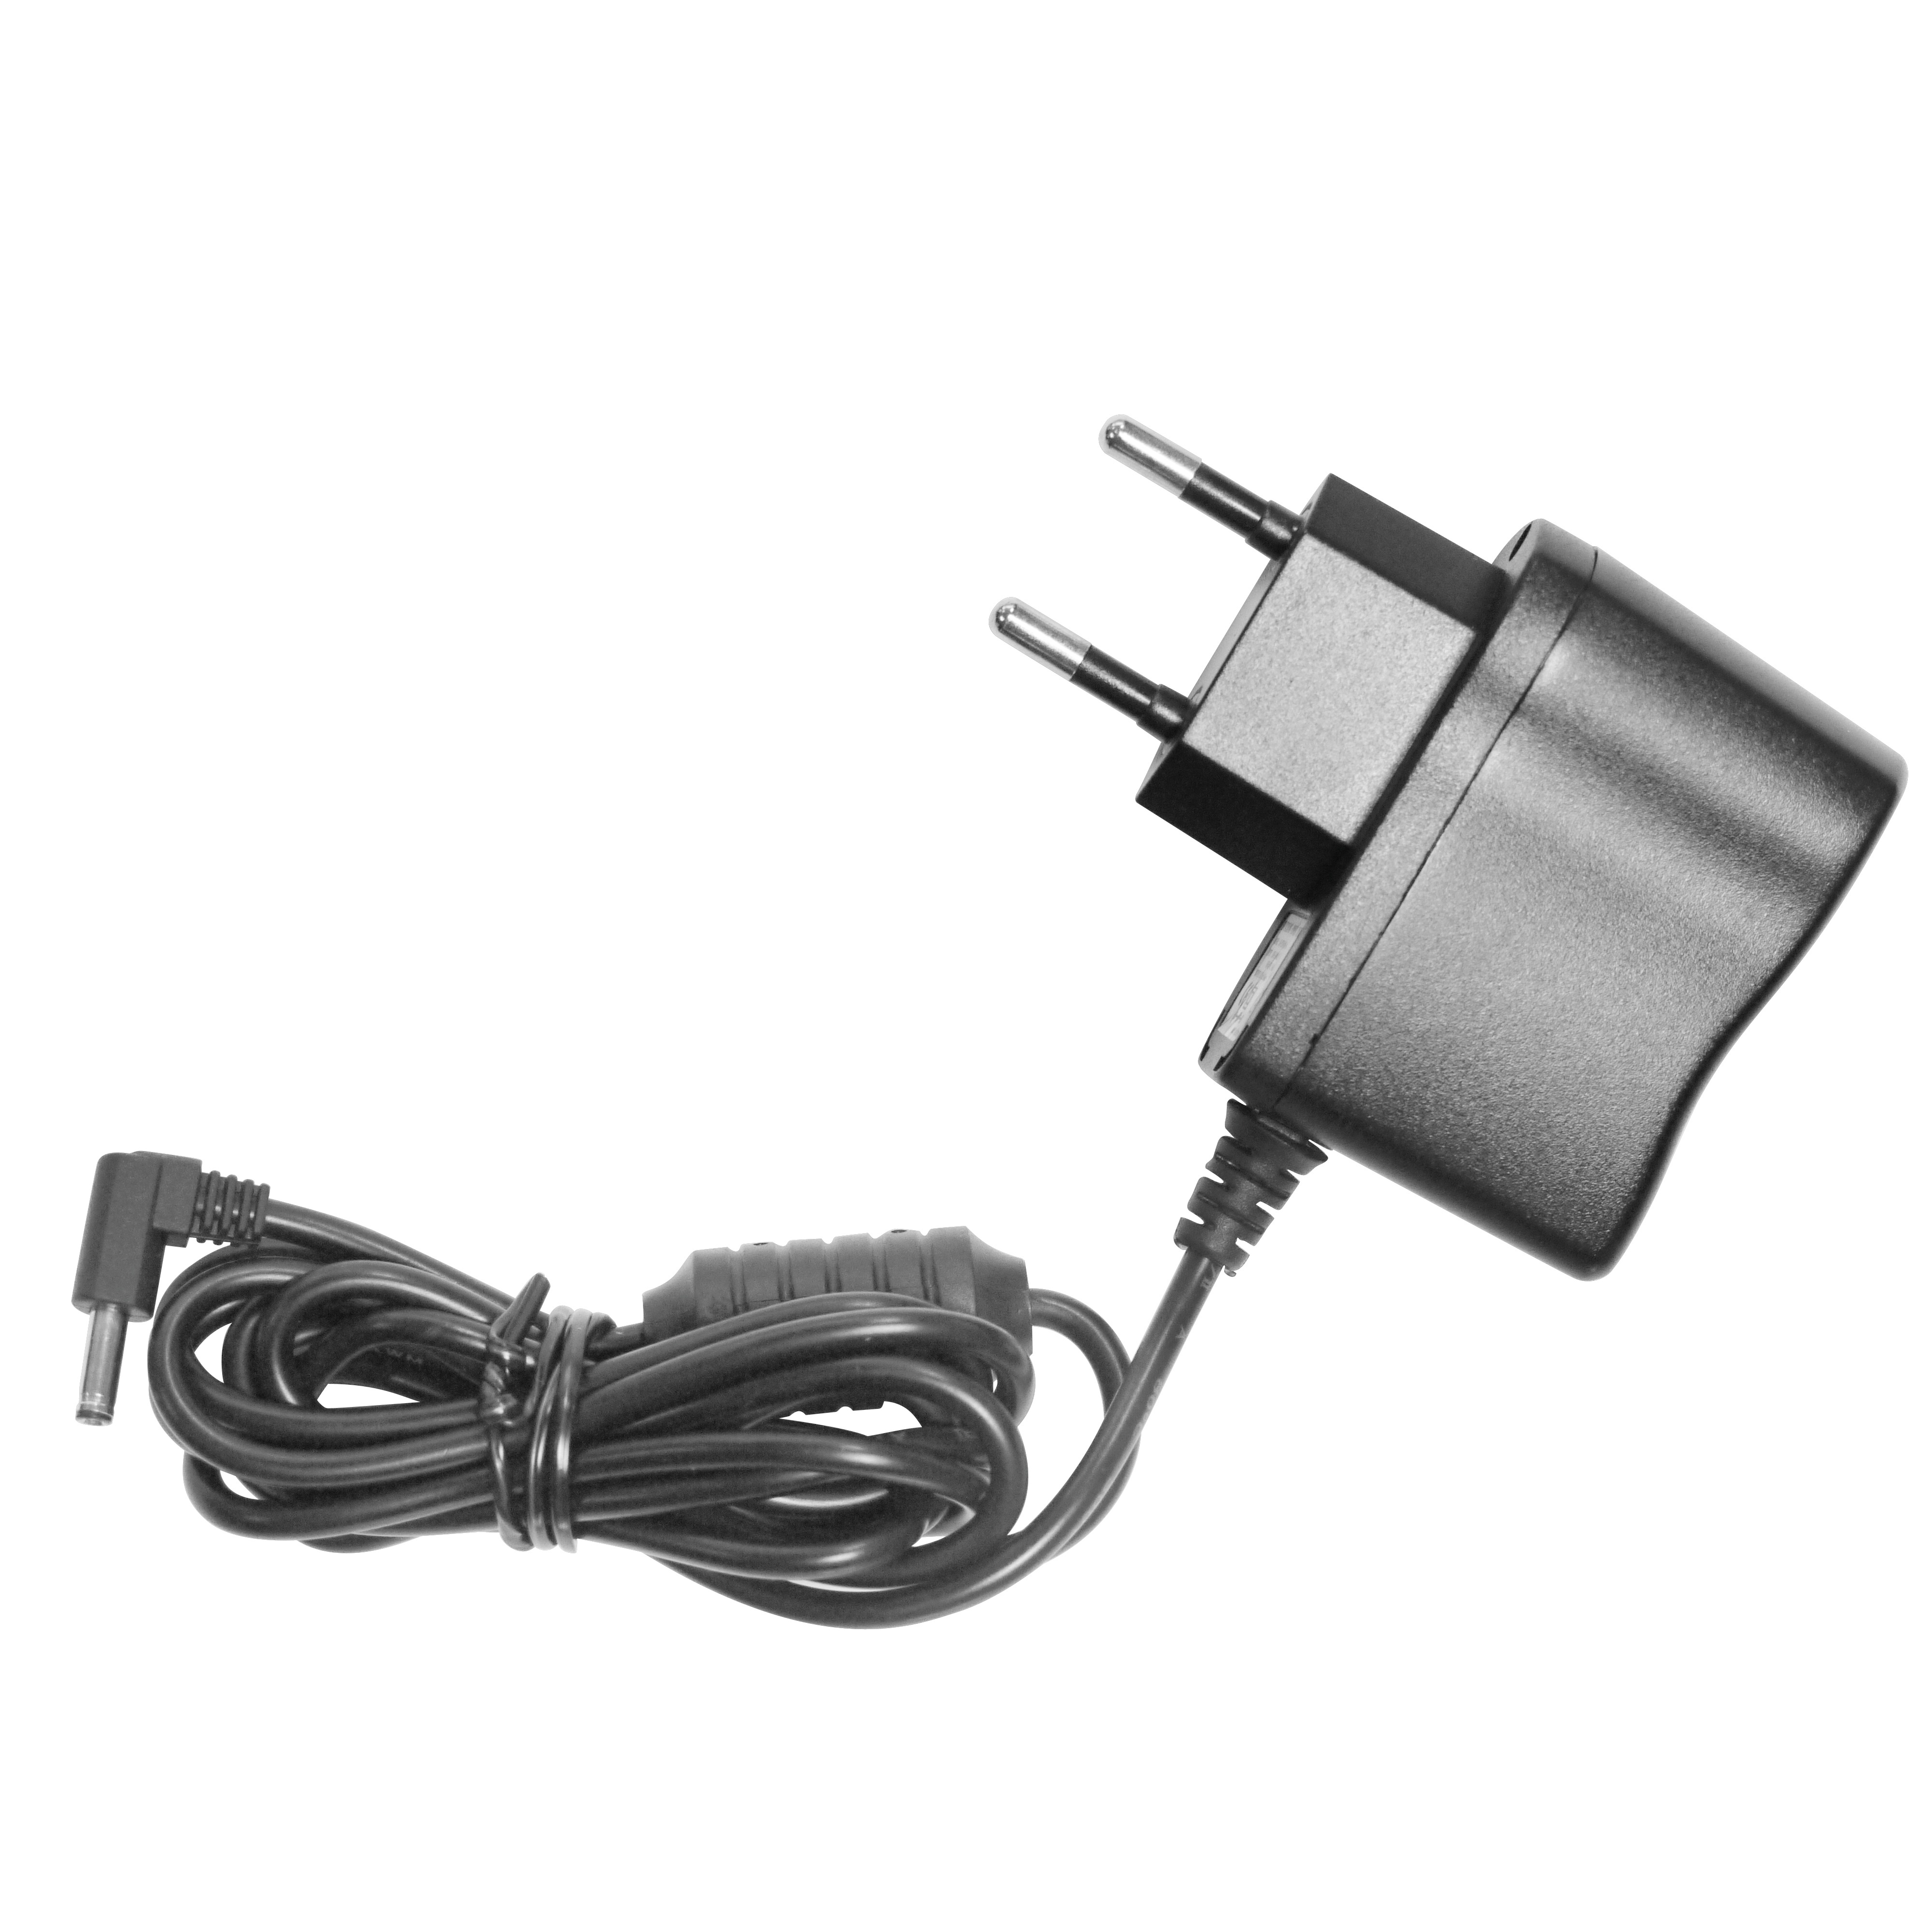 Wall charger (110 / 220 V)